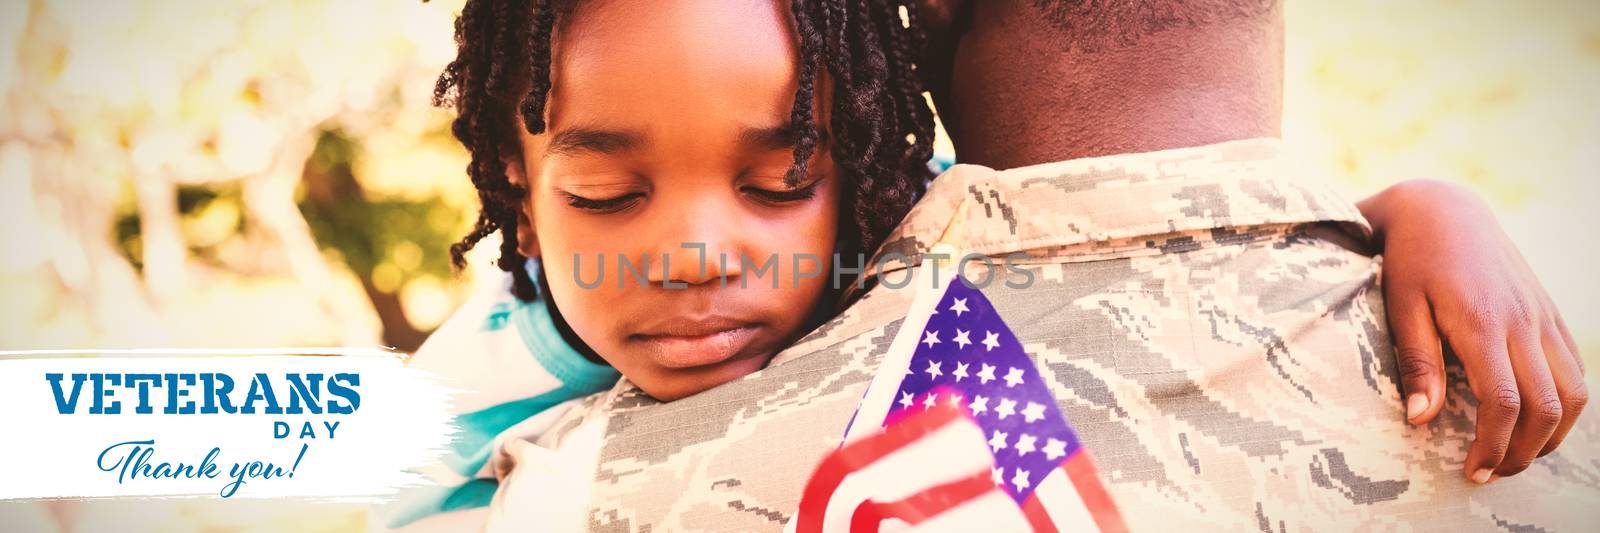 Logo for veterans day in america  against happy family posing together